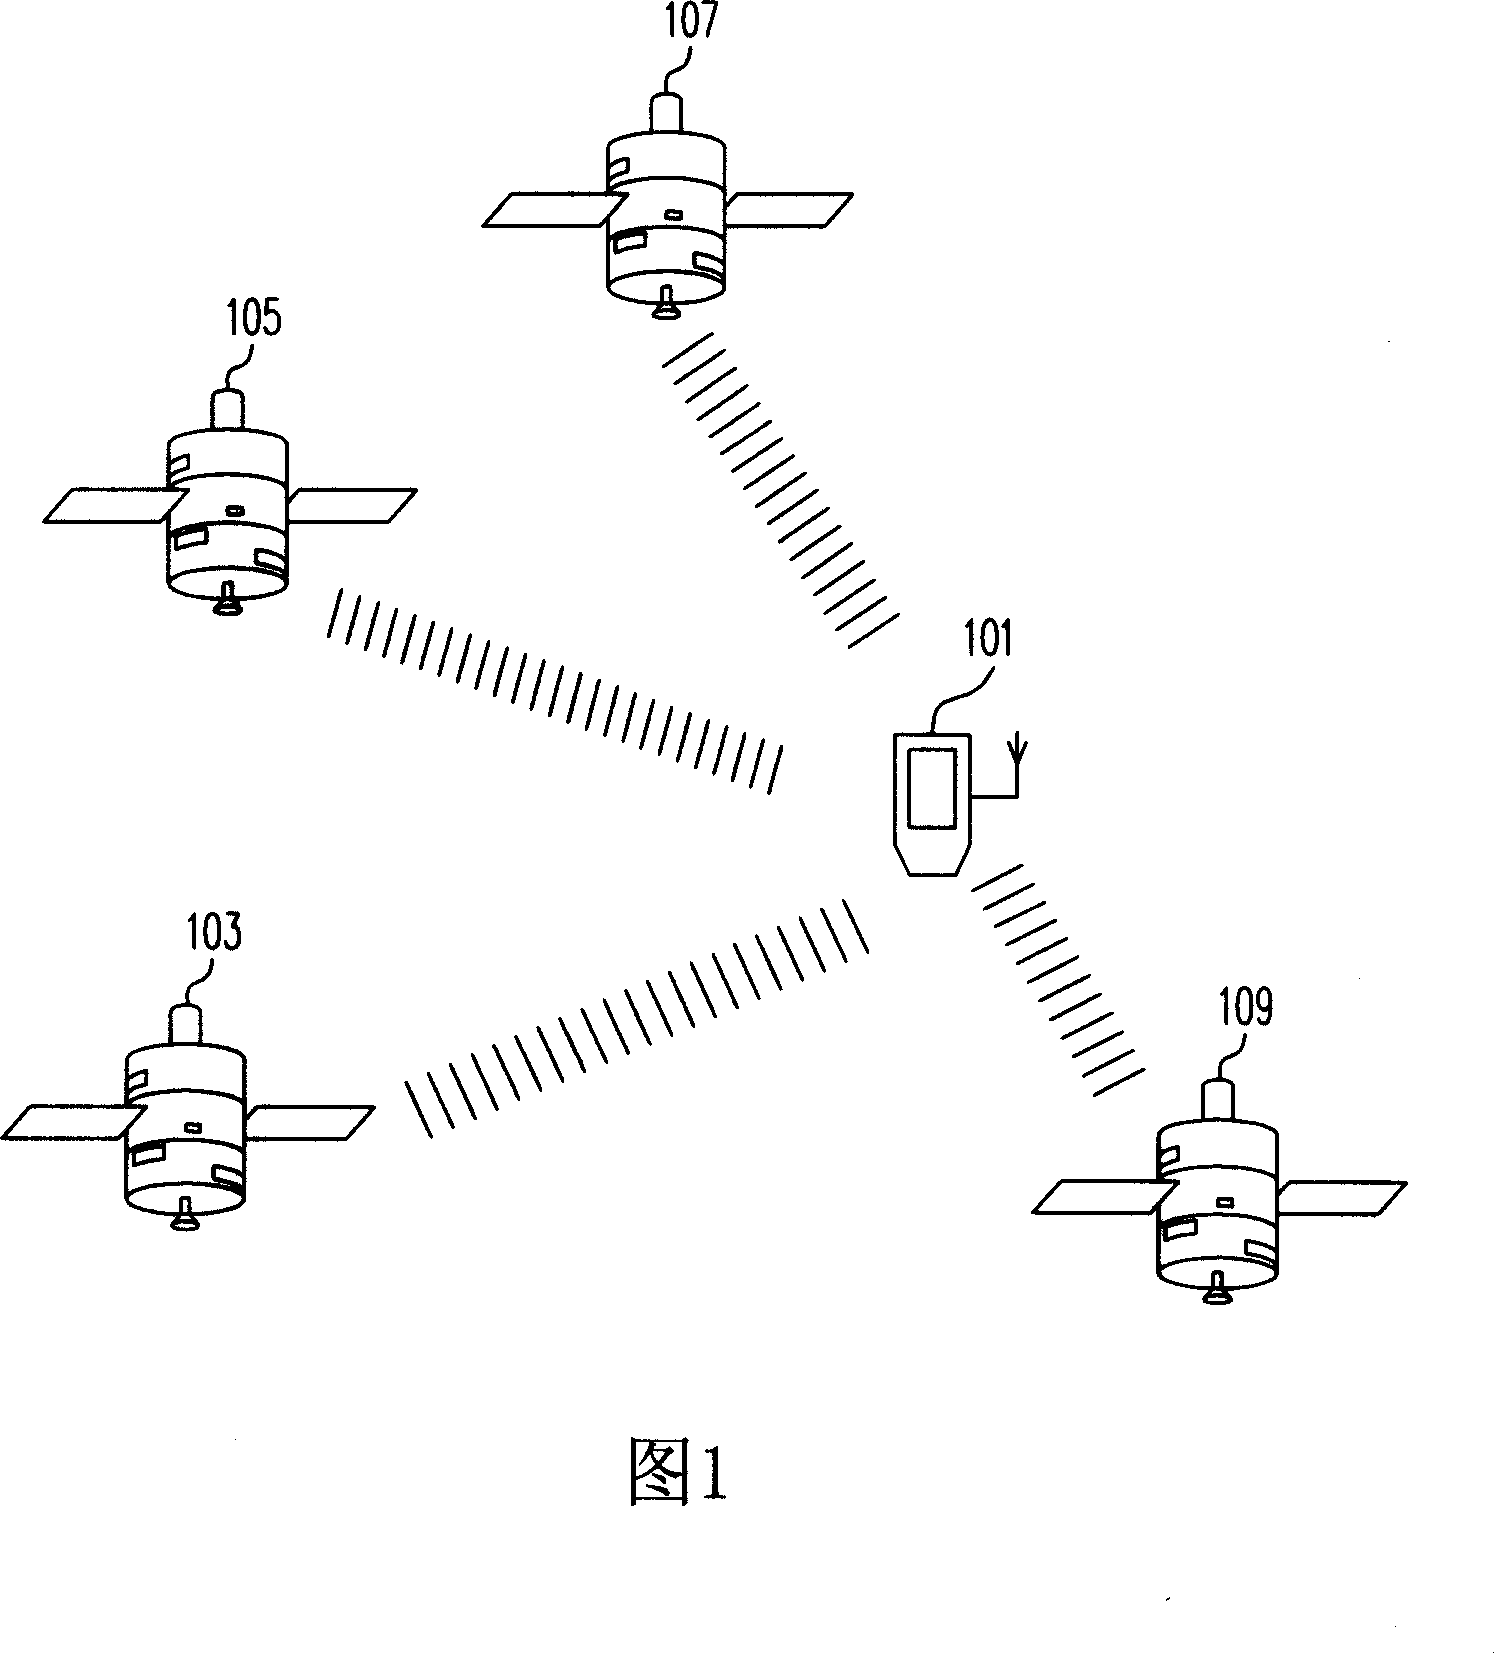 Method for displaying time on navigation device of global positioning system